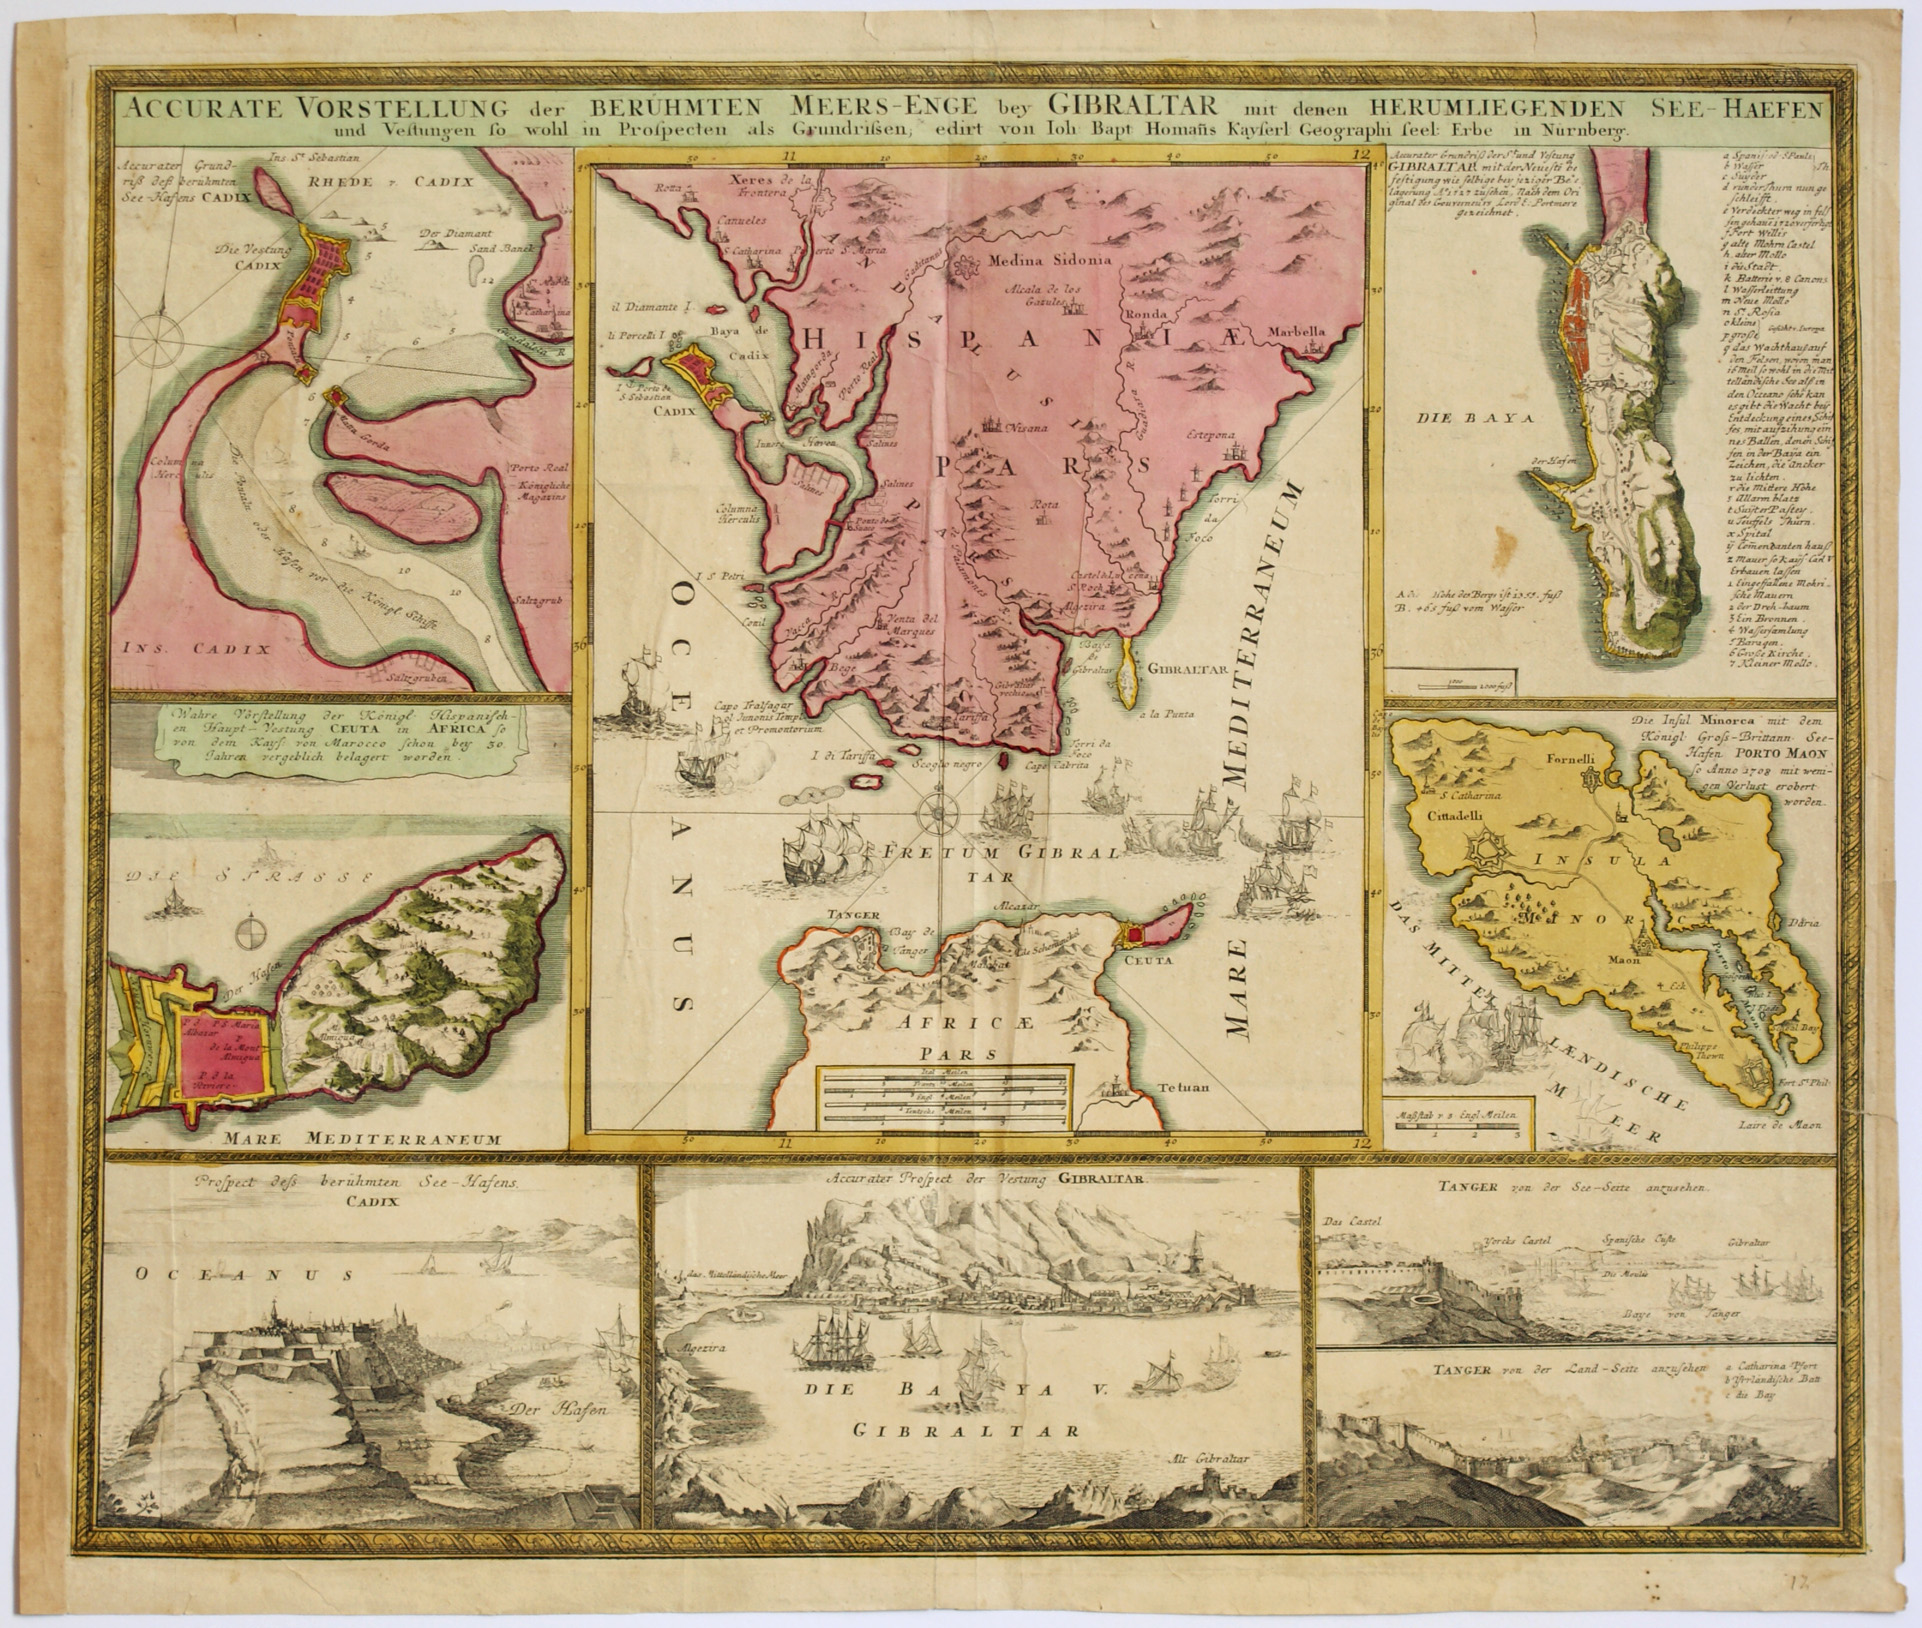 Maps and views of the Gibraltar's region